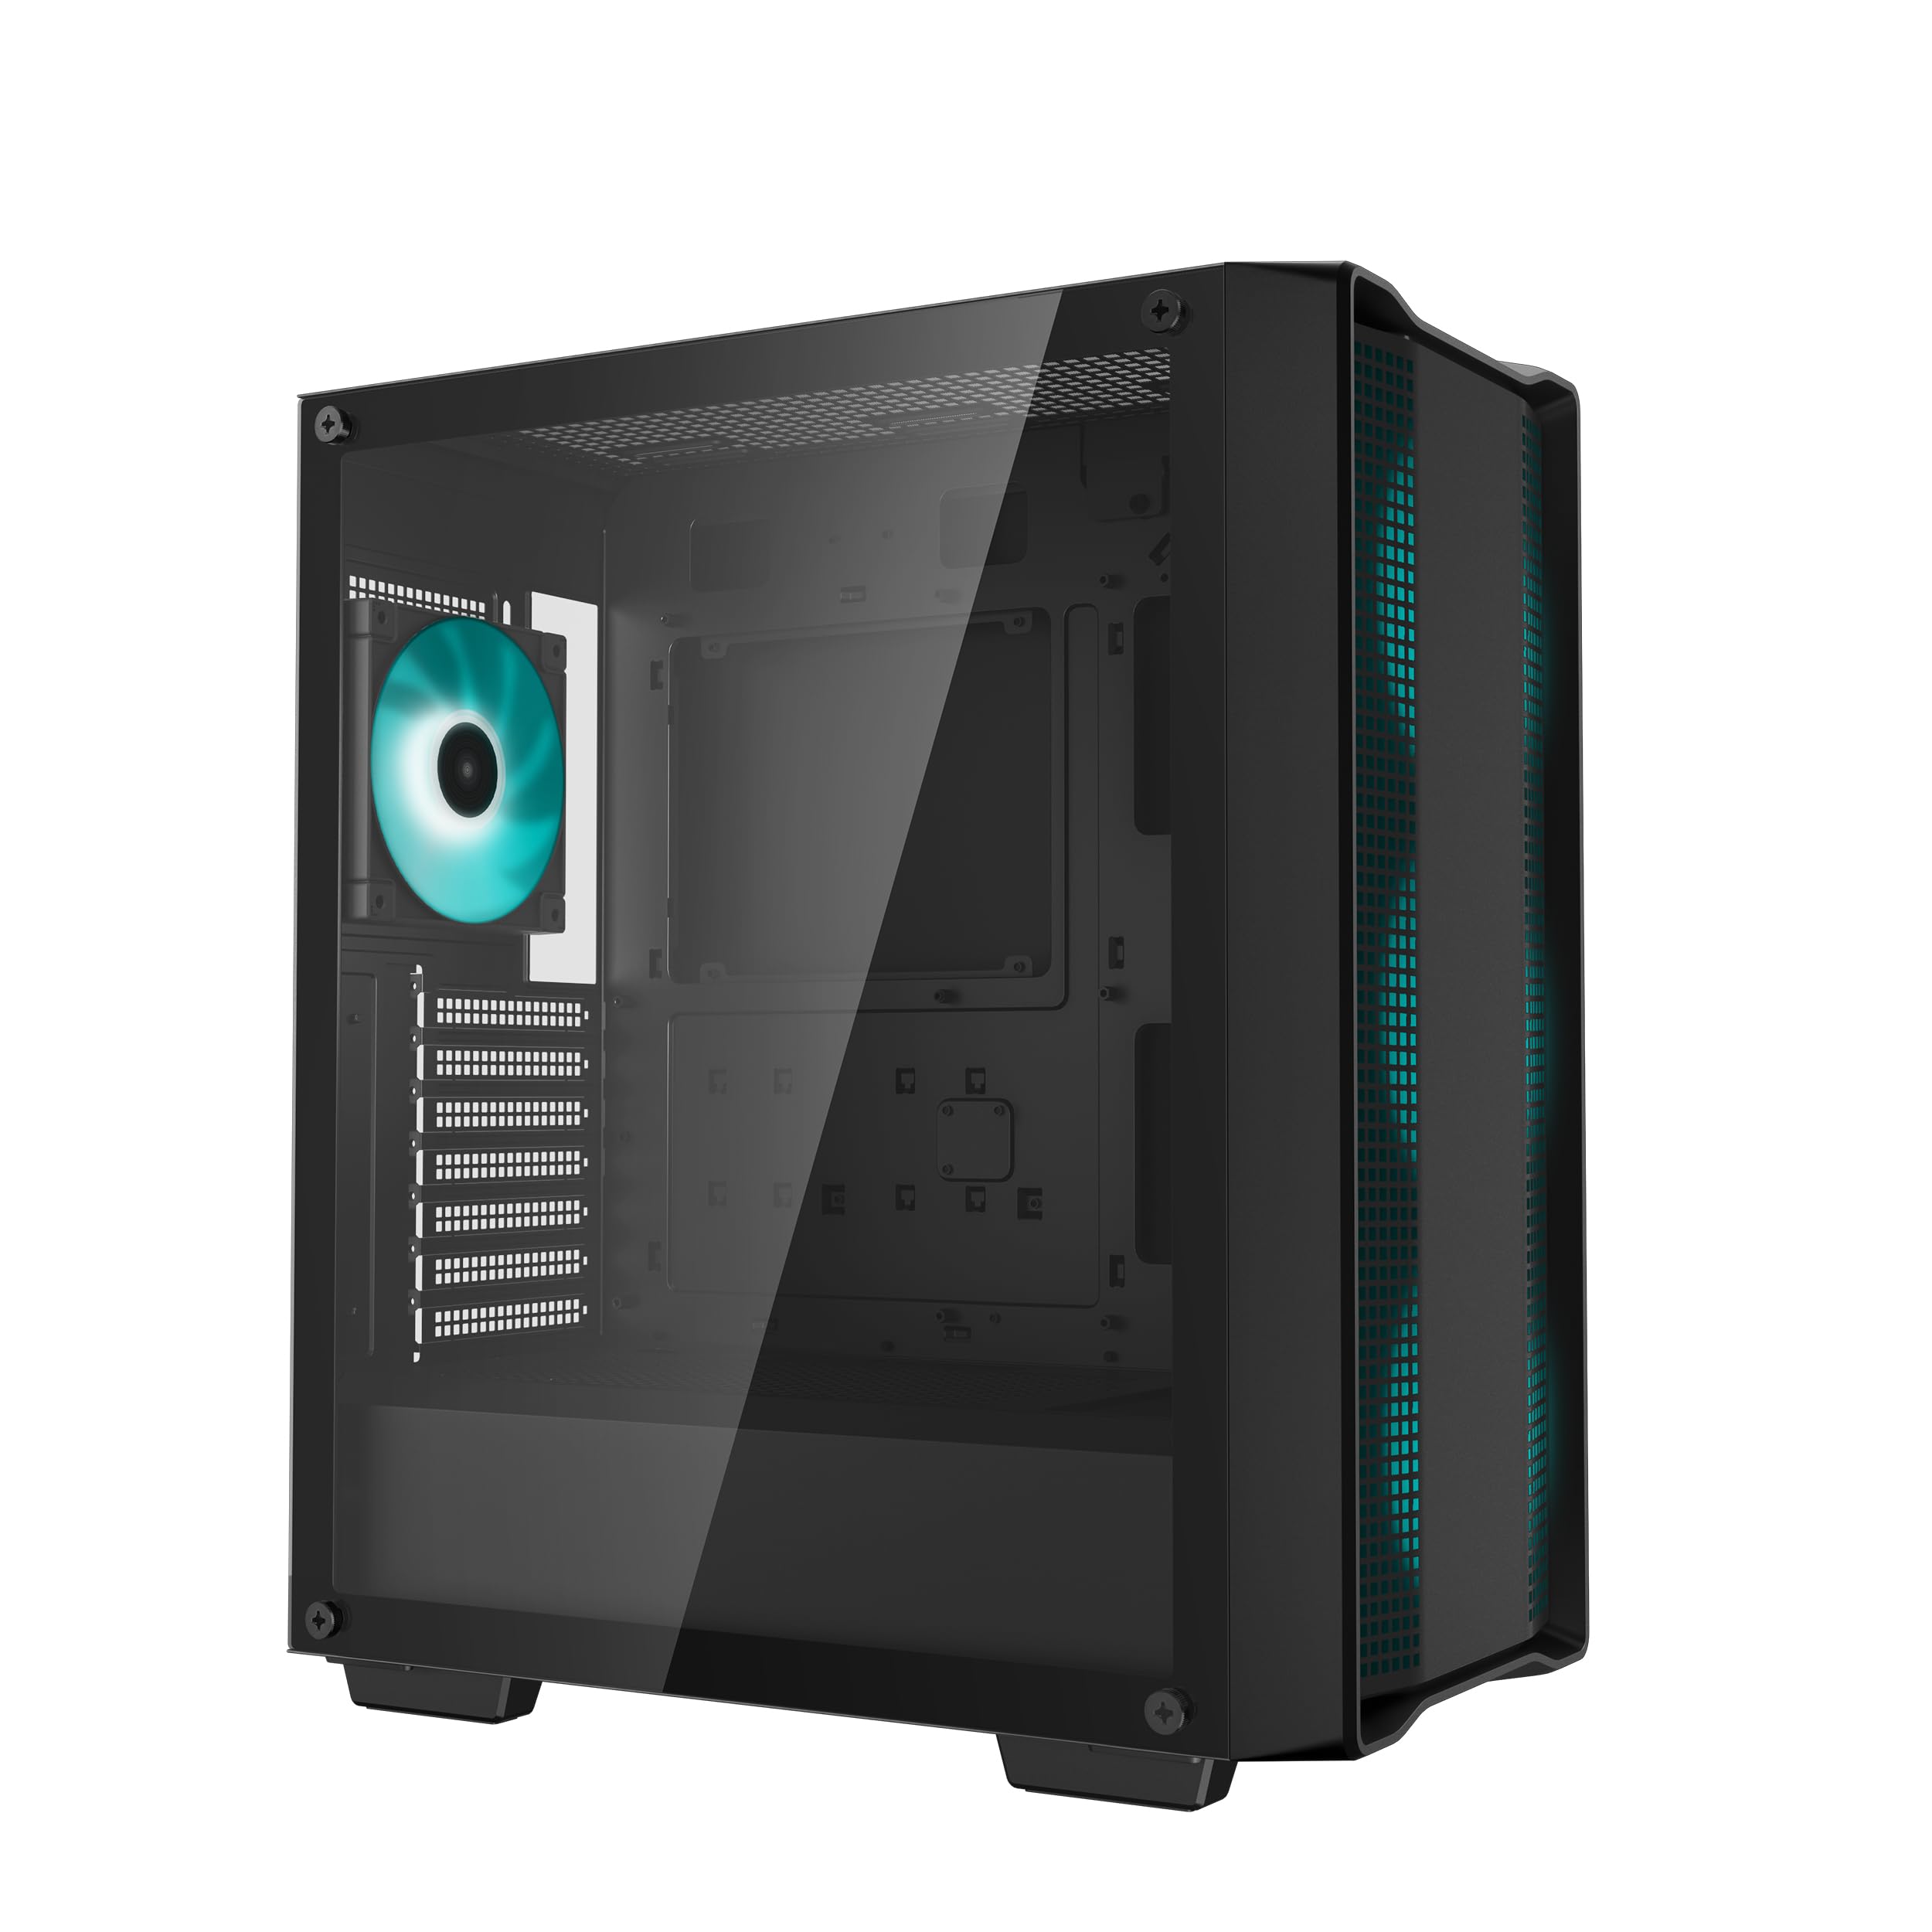 DeepCool CC560 V2 Mid-Tower ATX PC Case, 4X Pre-Installed 120mm LED Fans, Tempered Glass Side Panel, Black